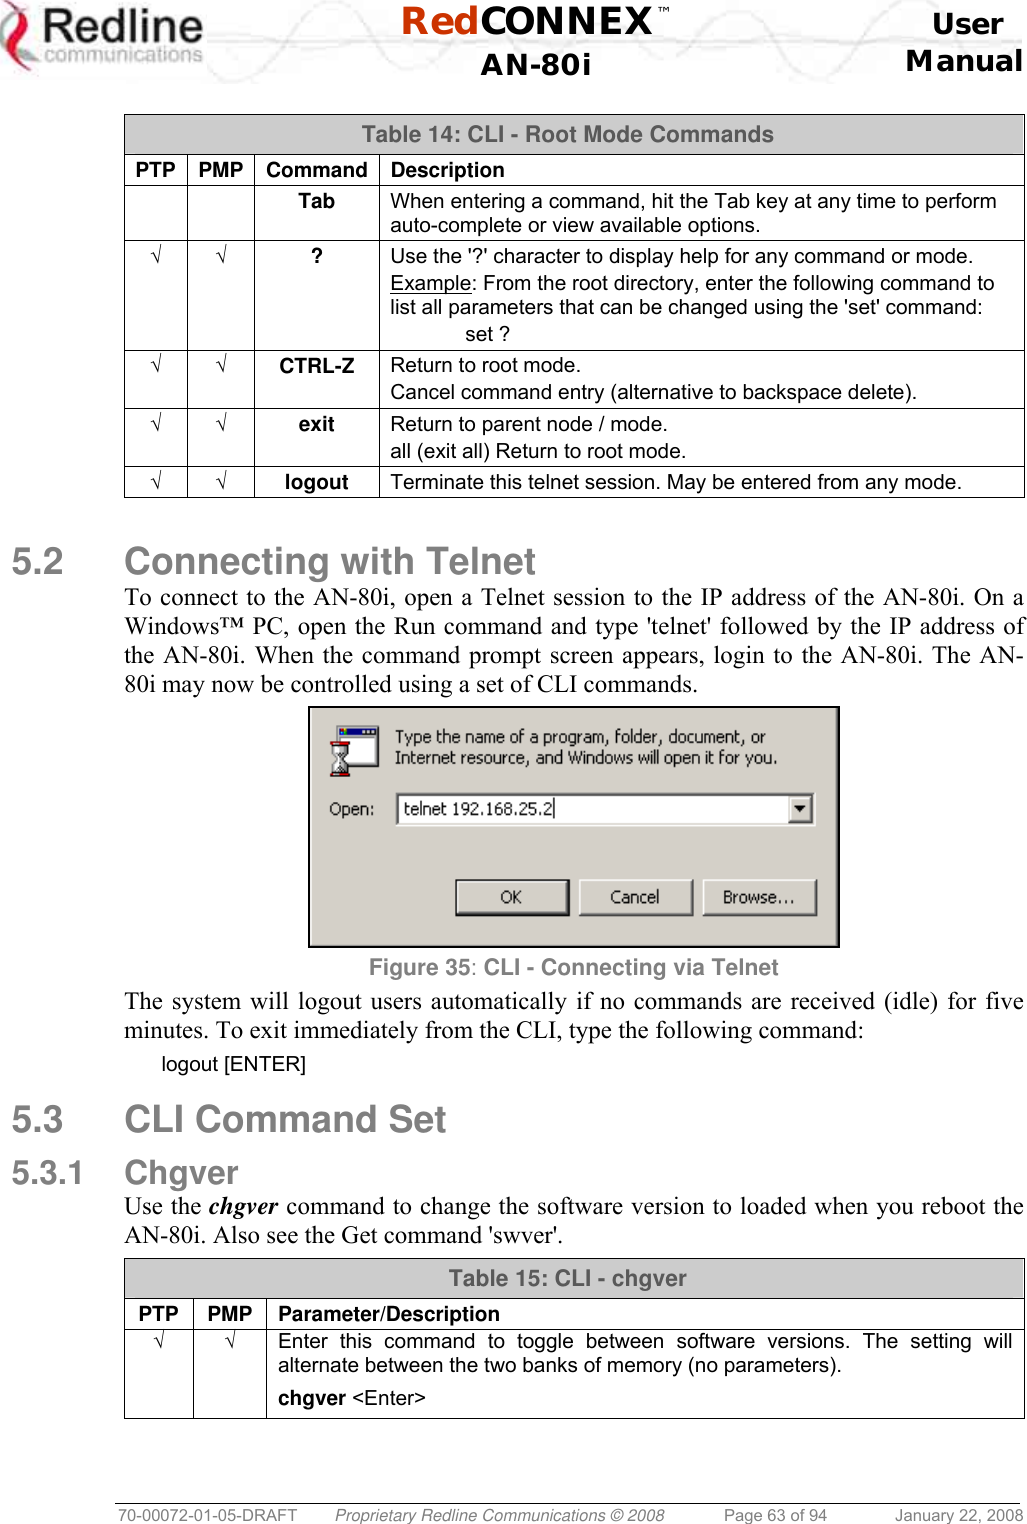  RedCONNEX™    User  AN-80i Manual  70-00072-01-05-DRAFT  Proprietary Redline Communications © 2008  Page 63 of 94  January 22, 2008  Table 14: CLI - Root Mode Commands PTP PMP Command Description    Tab  When entering a command, hit the Tab key at any time to perform auto-complete or view available options. √ √ ?  Use the &apos;?&apos; character to display help for any command or mode. Example: From the root directory, enter the following command to list all parameters that can be changed using the &apos;set&apos; command:  set ? √ √ CTRL-Z  Return to root mode. Cancel command entry (alternative to backspace delete). √ √ exit  Return to parent node / mode. all (exit all) Return to root mode. √ √ logout  Terminate this telnet session. May be entered from any mode.  5.2 Connecting with Telnet To connect to the AN-80i, open a Telnet session to the IP address of the AN-80i. On a Windows™ PC, open the Run command and type &apos;telnet&apos; followed by the IP address of the AN-80i. When the command prompt screen appears, login to the AN-80i. The AN-80i may now be controlled using a set of CLI commands.  Figure 35: CLI - Connecting via Telnet The system will logout users automatically if no commands are received (idle) for five minutes. To exit immediately from the CLI, type the following command: logout [ENTER]  5.3  CLI Command Set 5.3.1 Chgver Use the chgver command to change the software version to loaded when you reboot the AN-80i. Also see the Get command &apos;swver&apos;. Table 15: CLI - chgver PTP PMP Parameter/Description √ √  Enter this command to toggle between software versions. The setting will alternate between the two banks of memory (no parameters). chgver &lt;Enter&gt;  